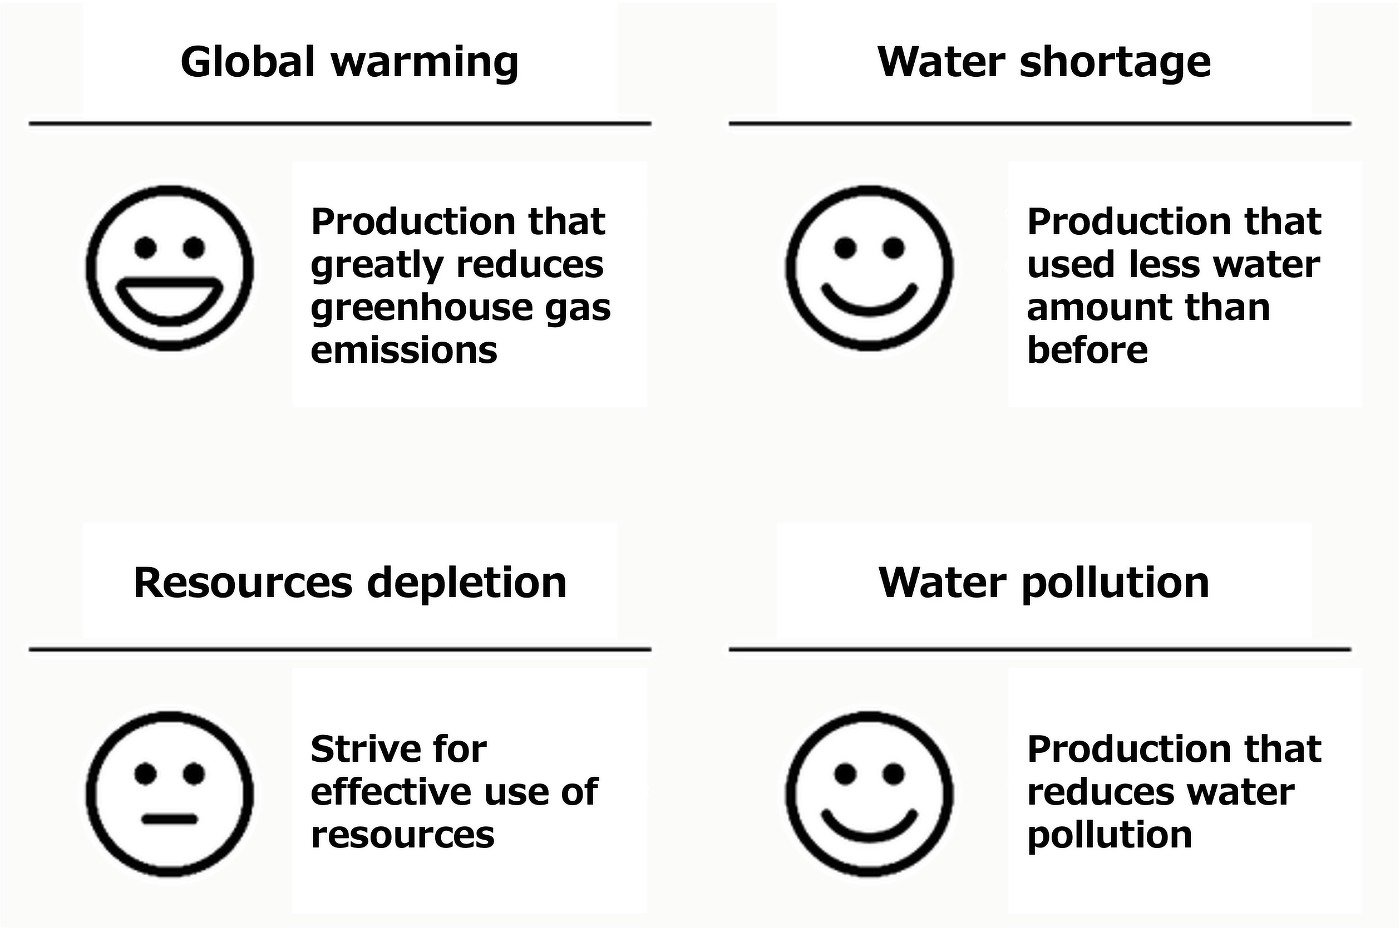 Indicators for responding to environmental issues